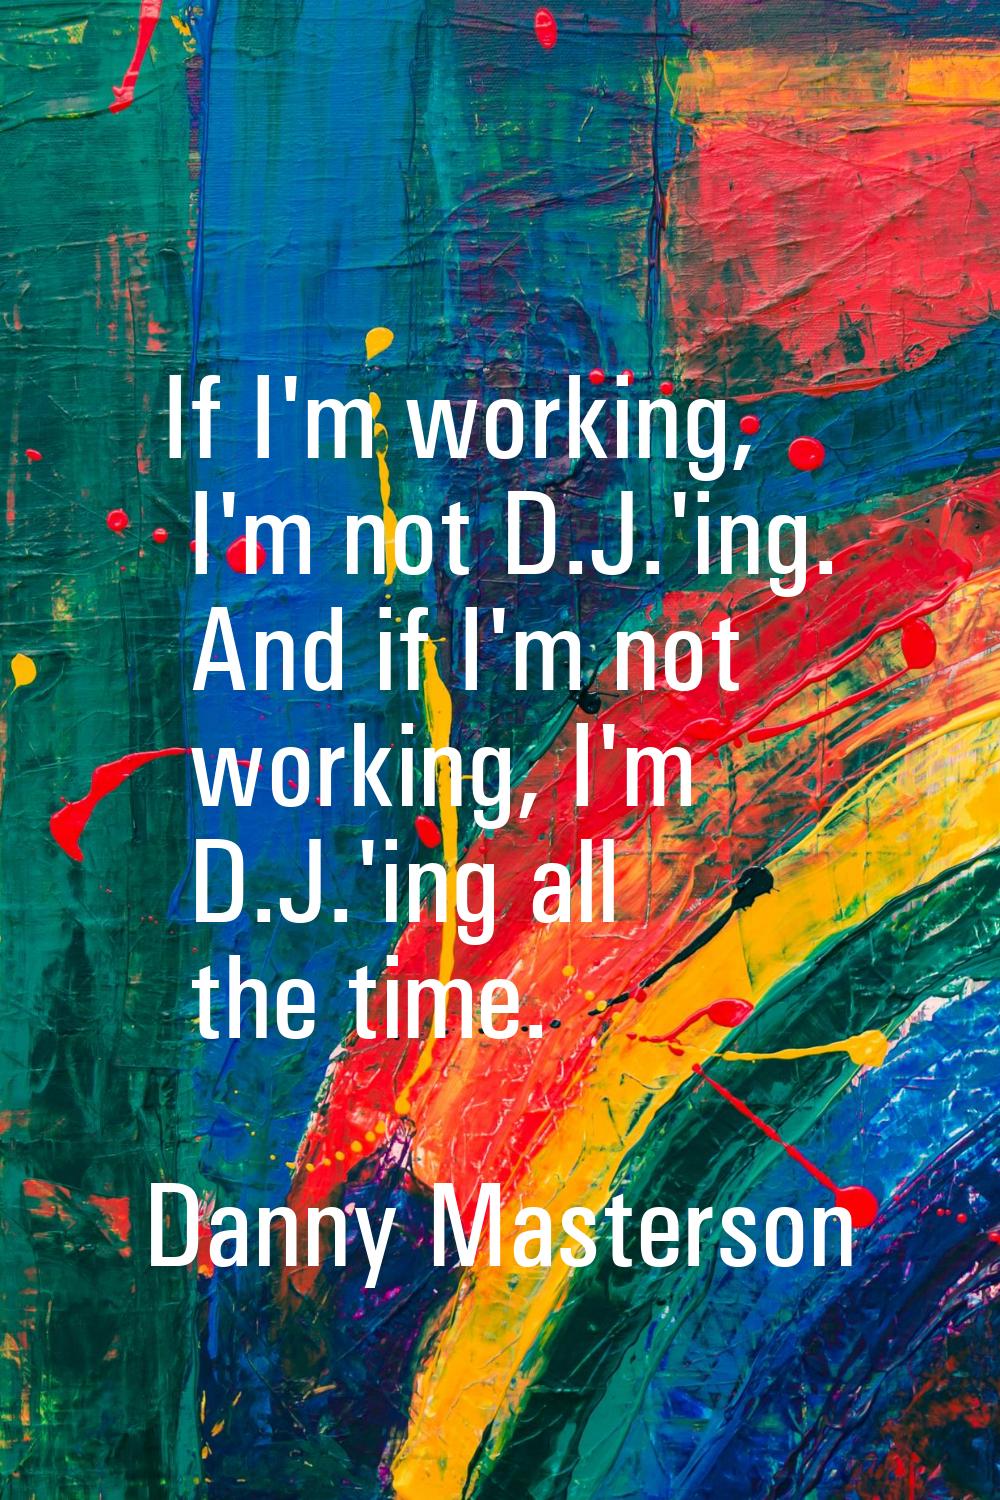 If I'm working, I'm not D.J.'ing. And if I'm not working, I'm D.J.'ing all the time.